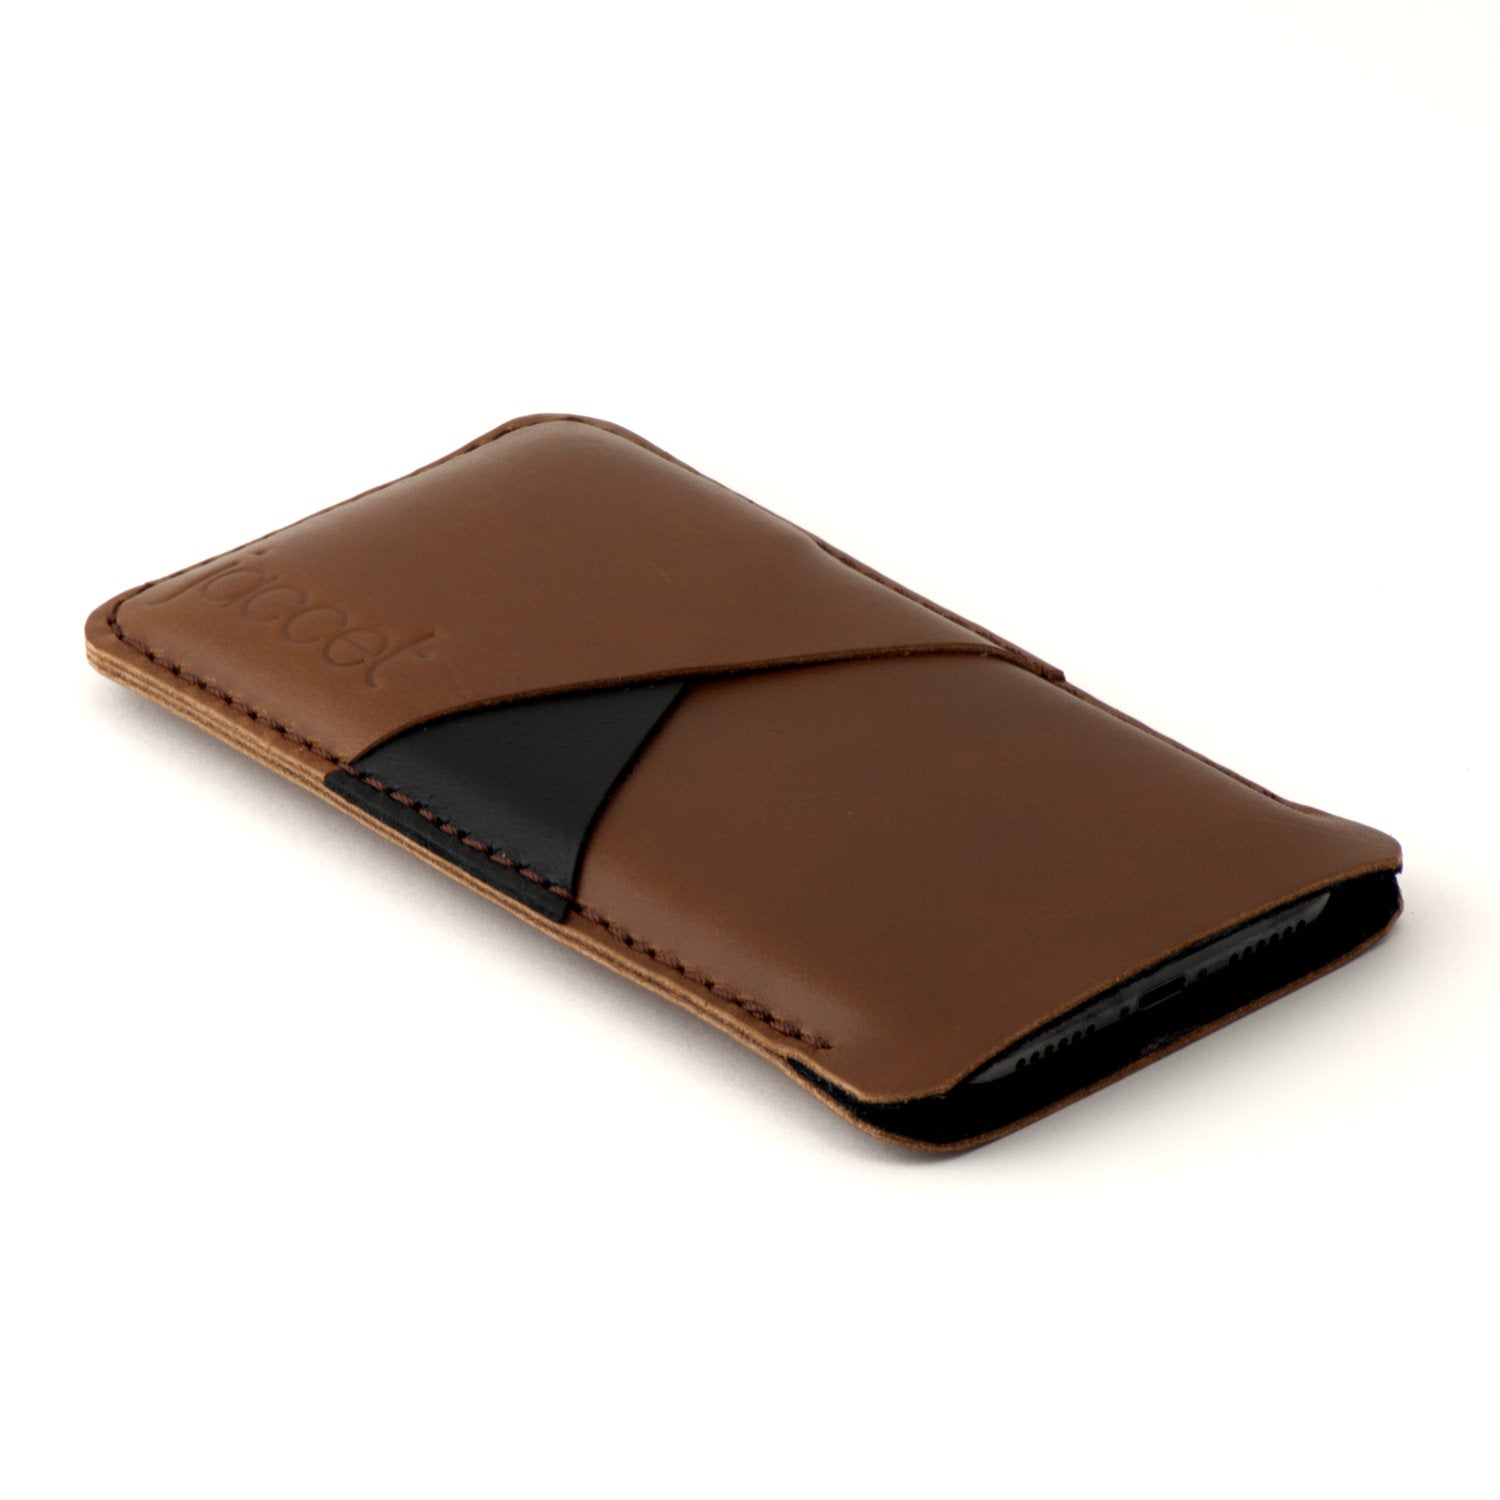 Full-grain leather Google Pixel sleeve - Brown leather with two pockets voor cards